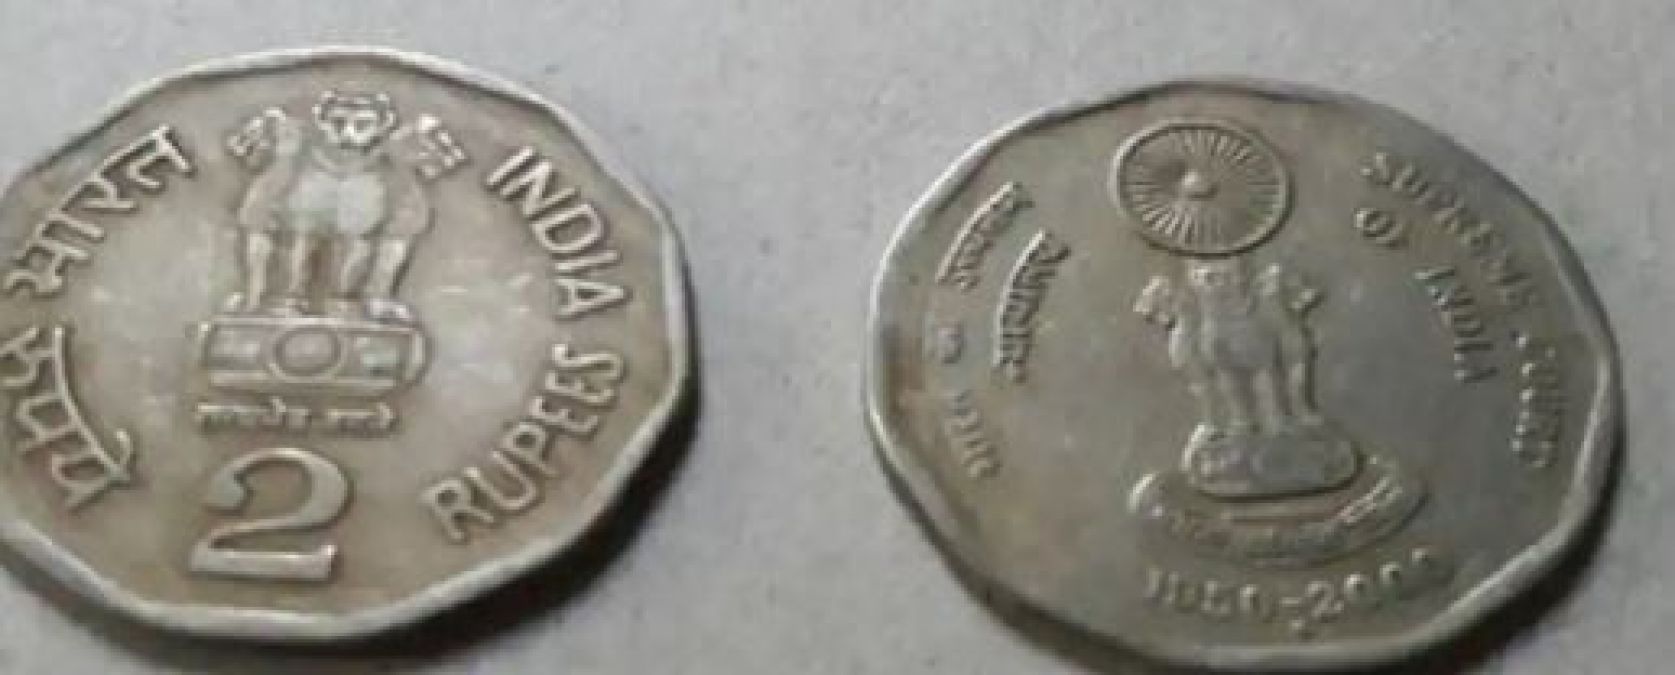 This Rs 2 coin can fetch you Rs 5 lakh here